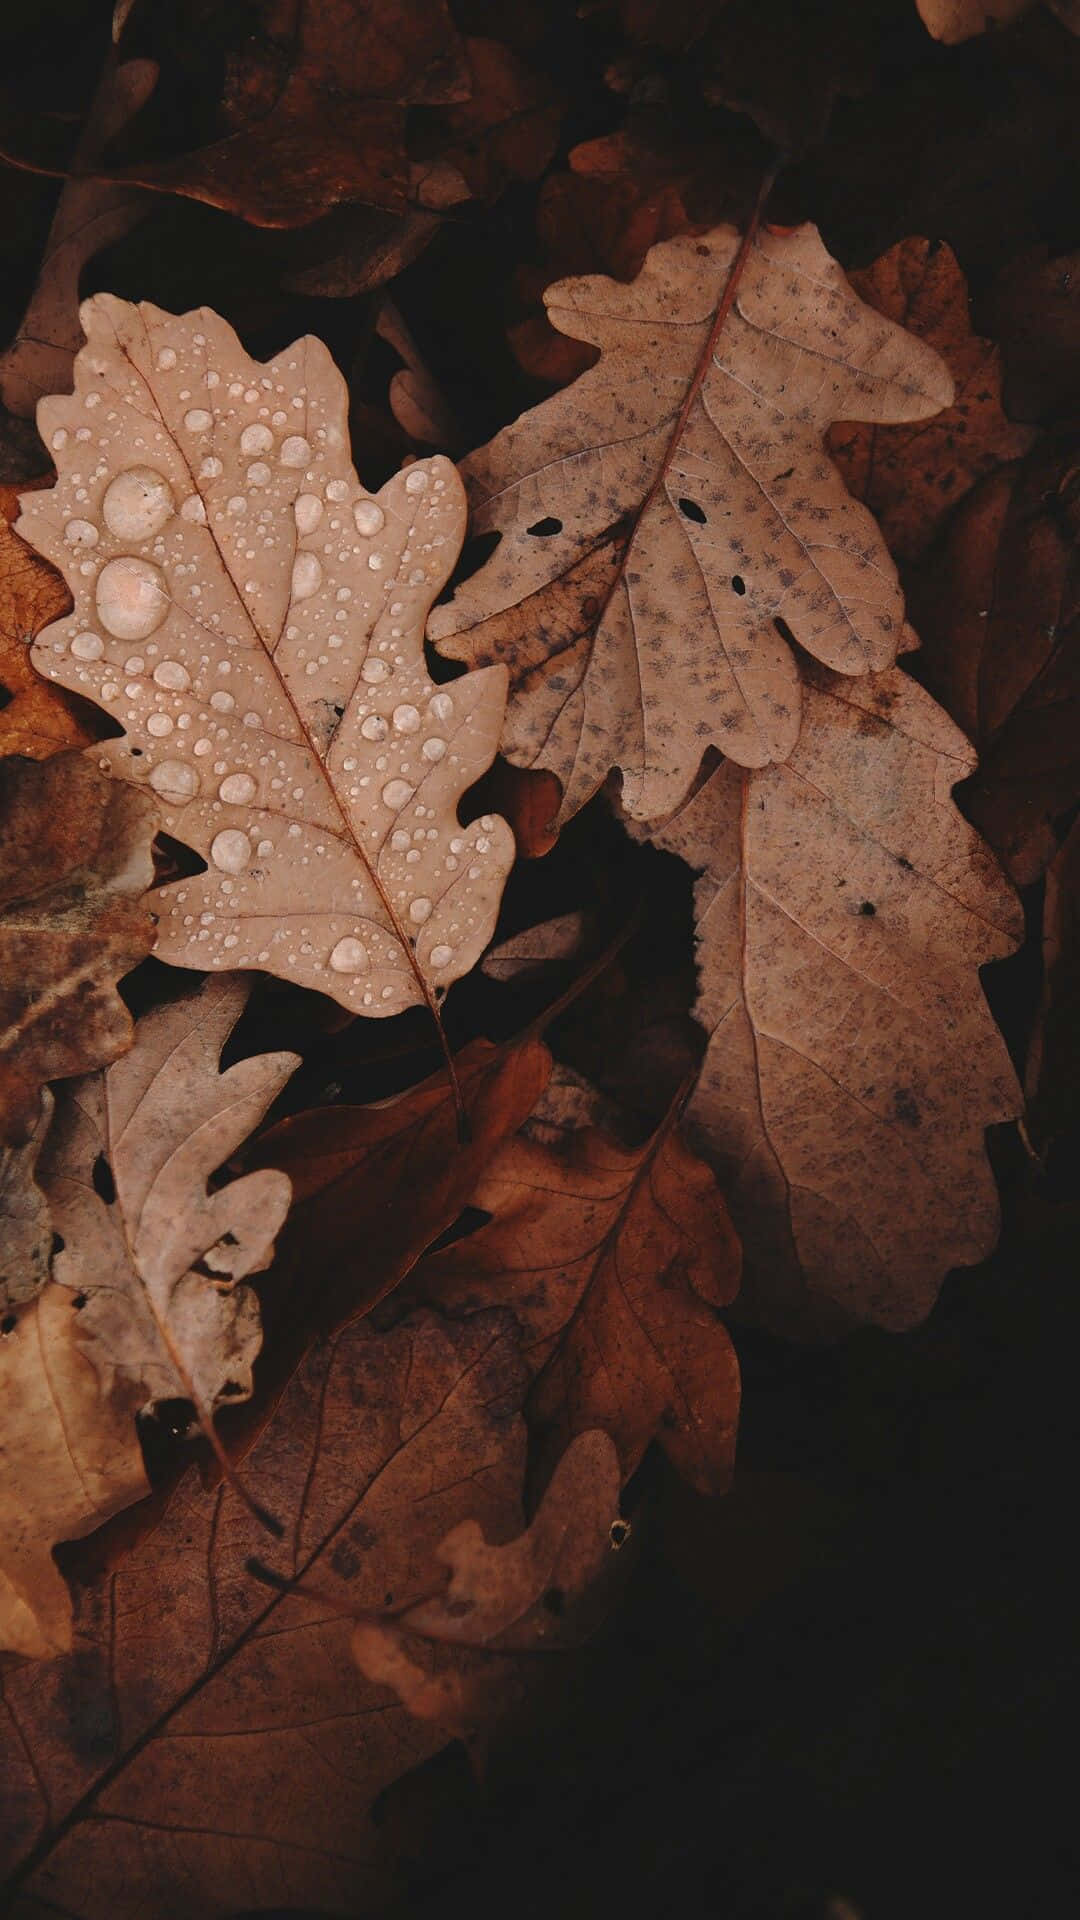 Autumn Leaves With Water Droplets On Them